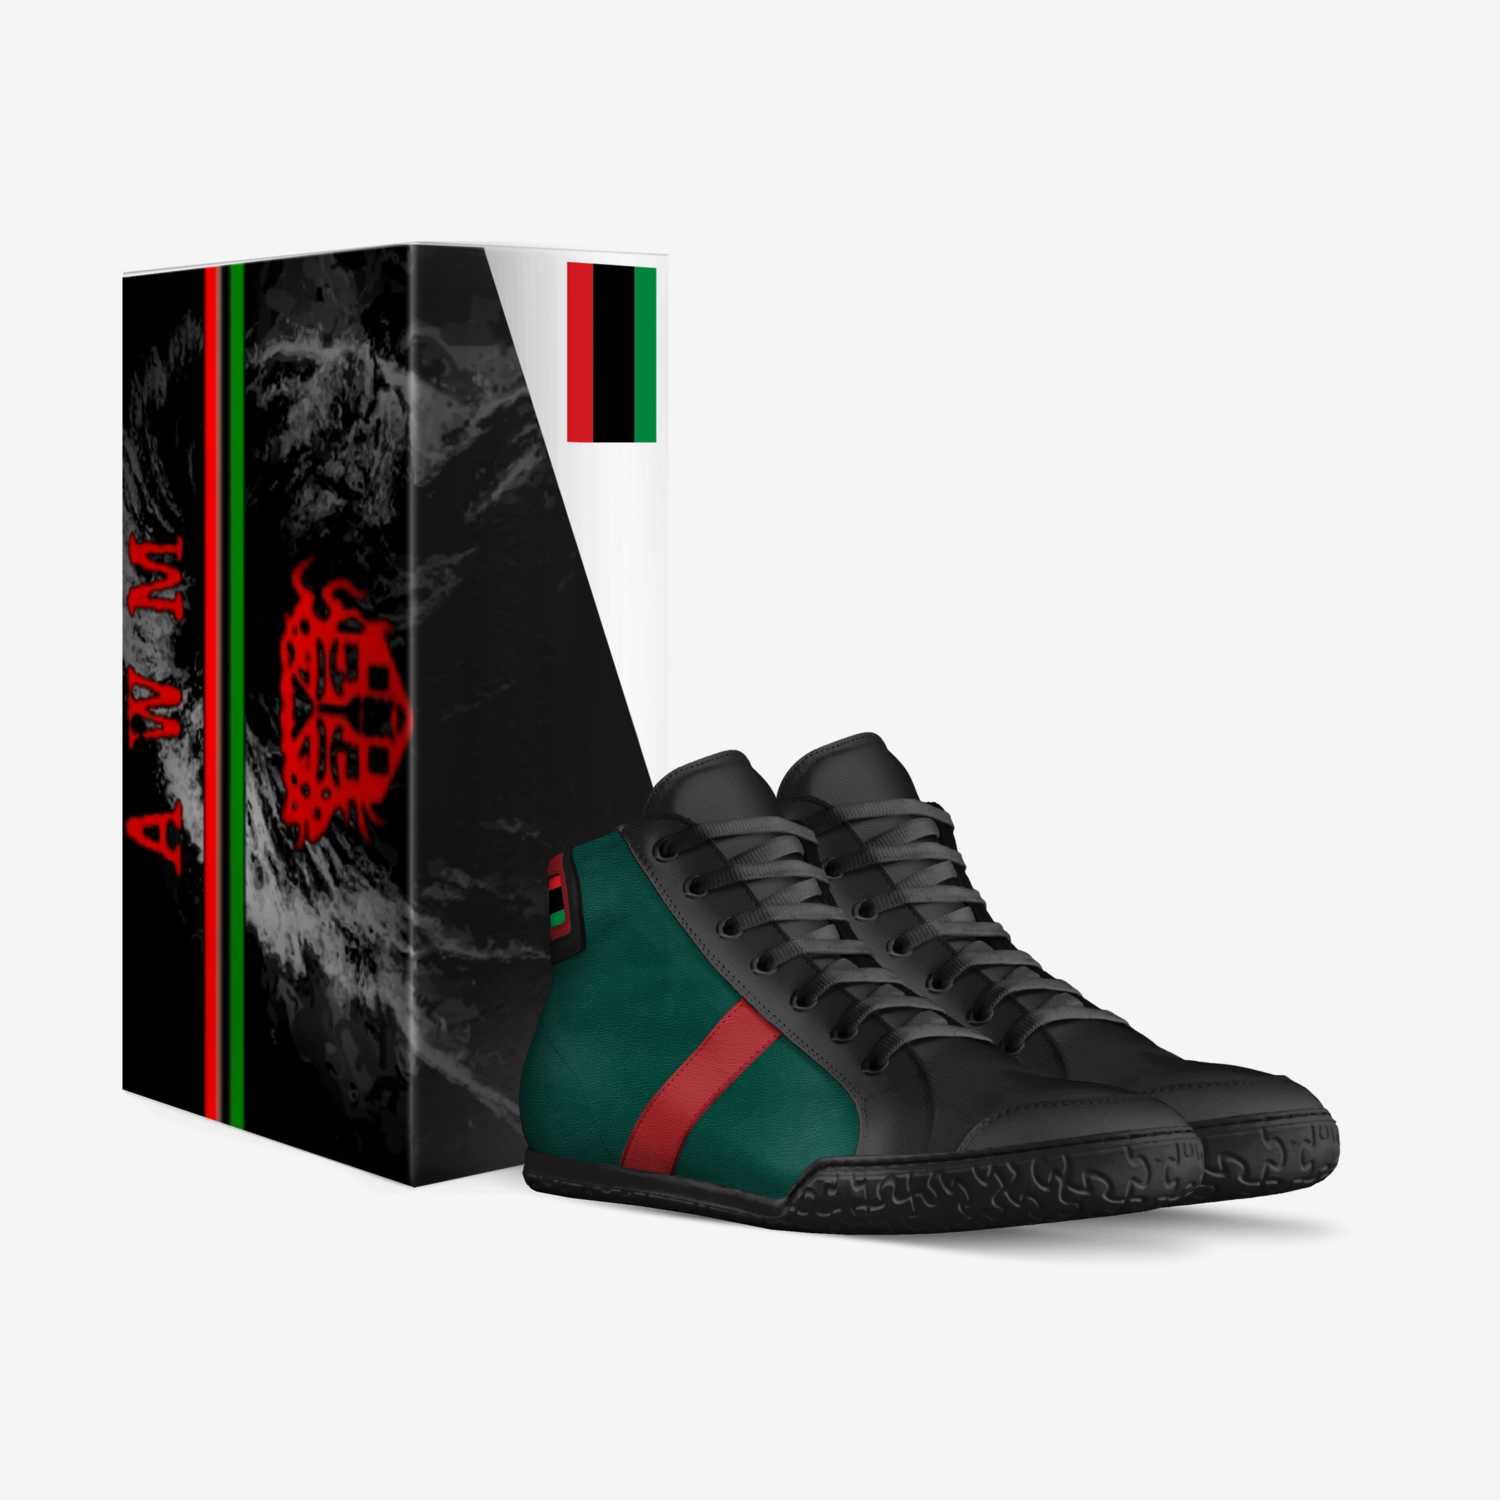 awm custom made in Italy shoes by African War Mask | Box view